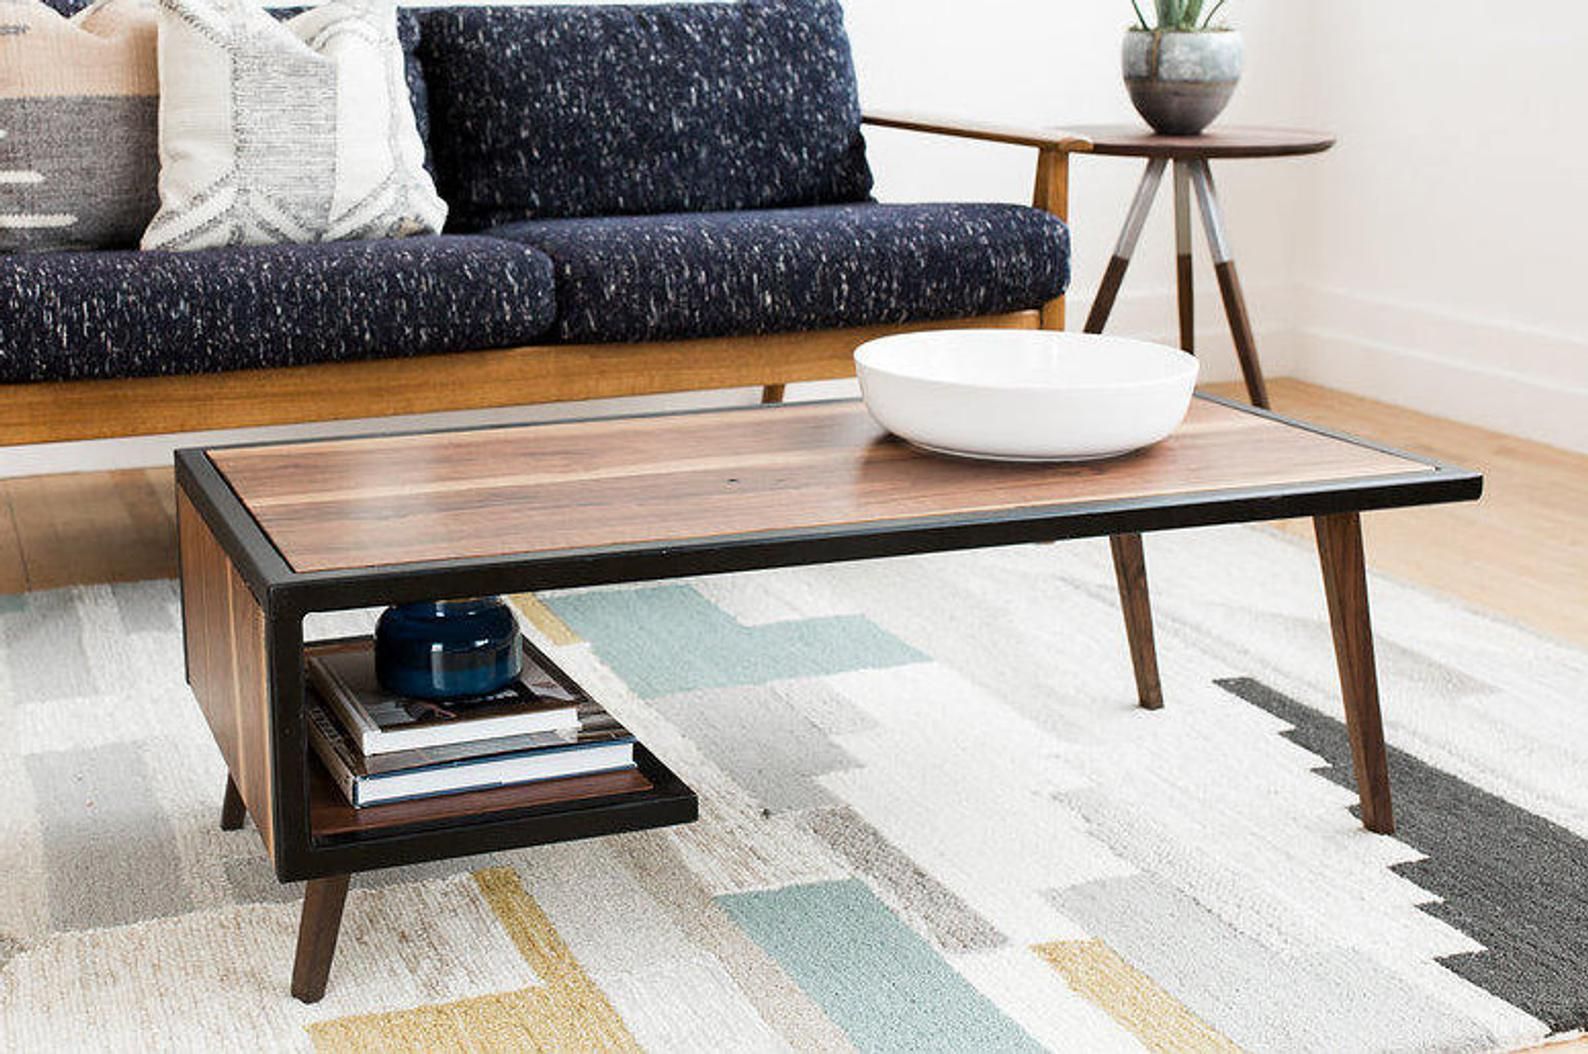 Mid Century Modern Style Coffee Tables You'Ll Love – Atomic Ranch With Regard To Wooden Mid Century Coffee Tables (Photo 4 of 15)